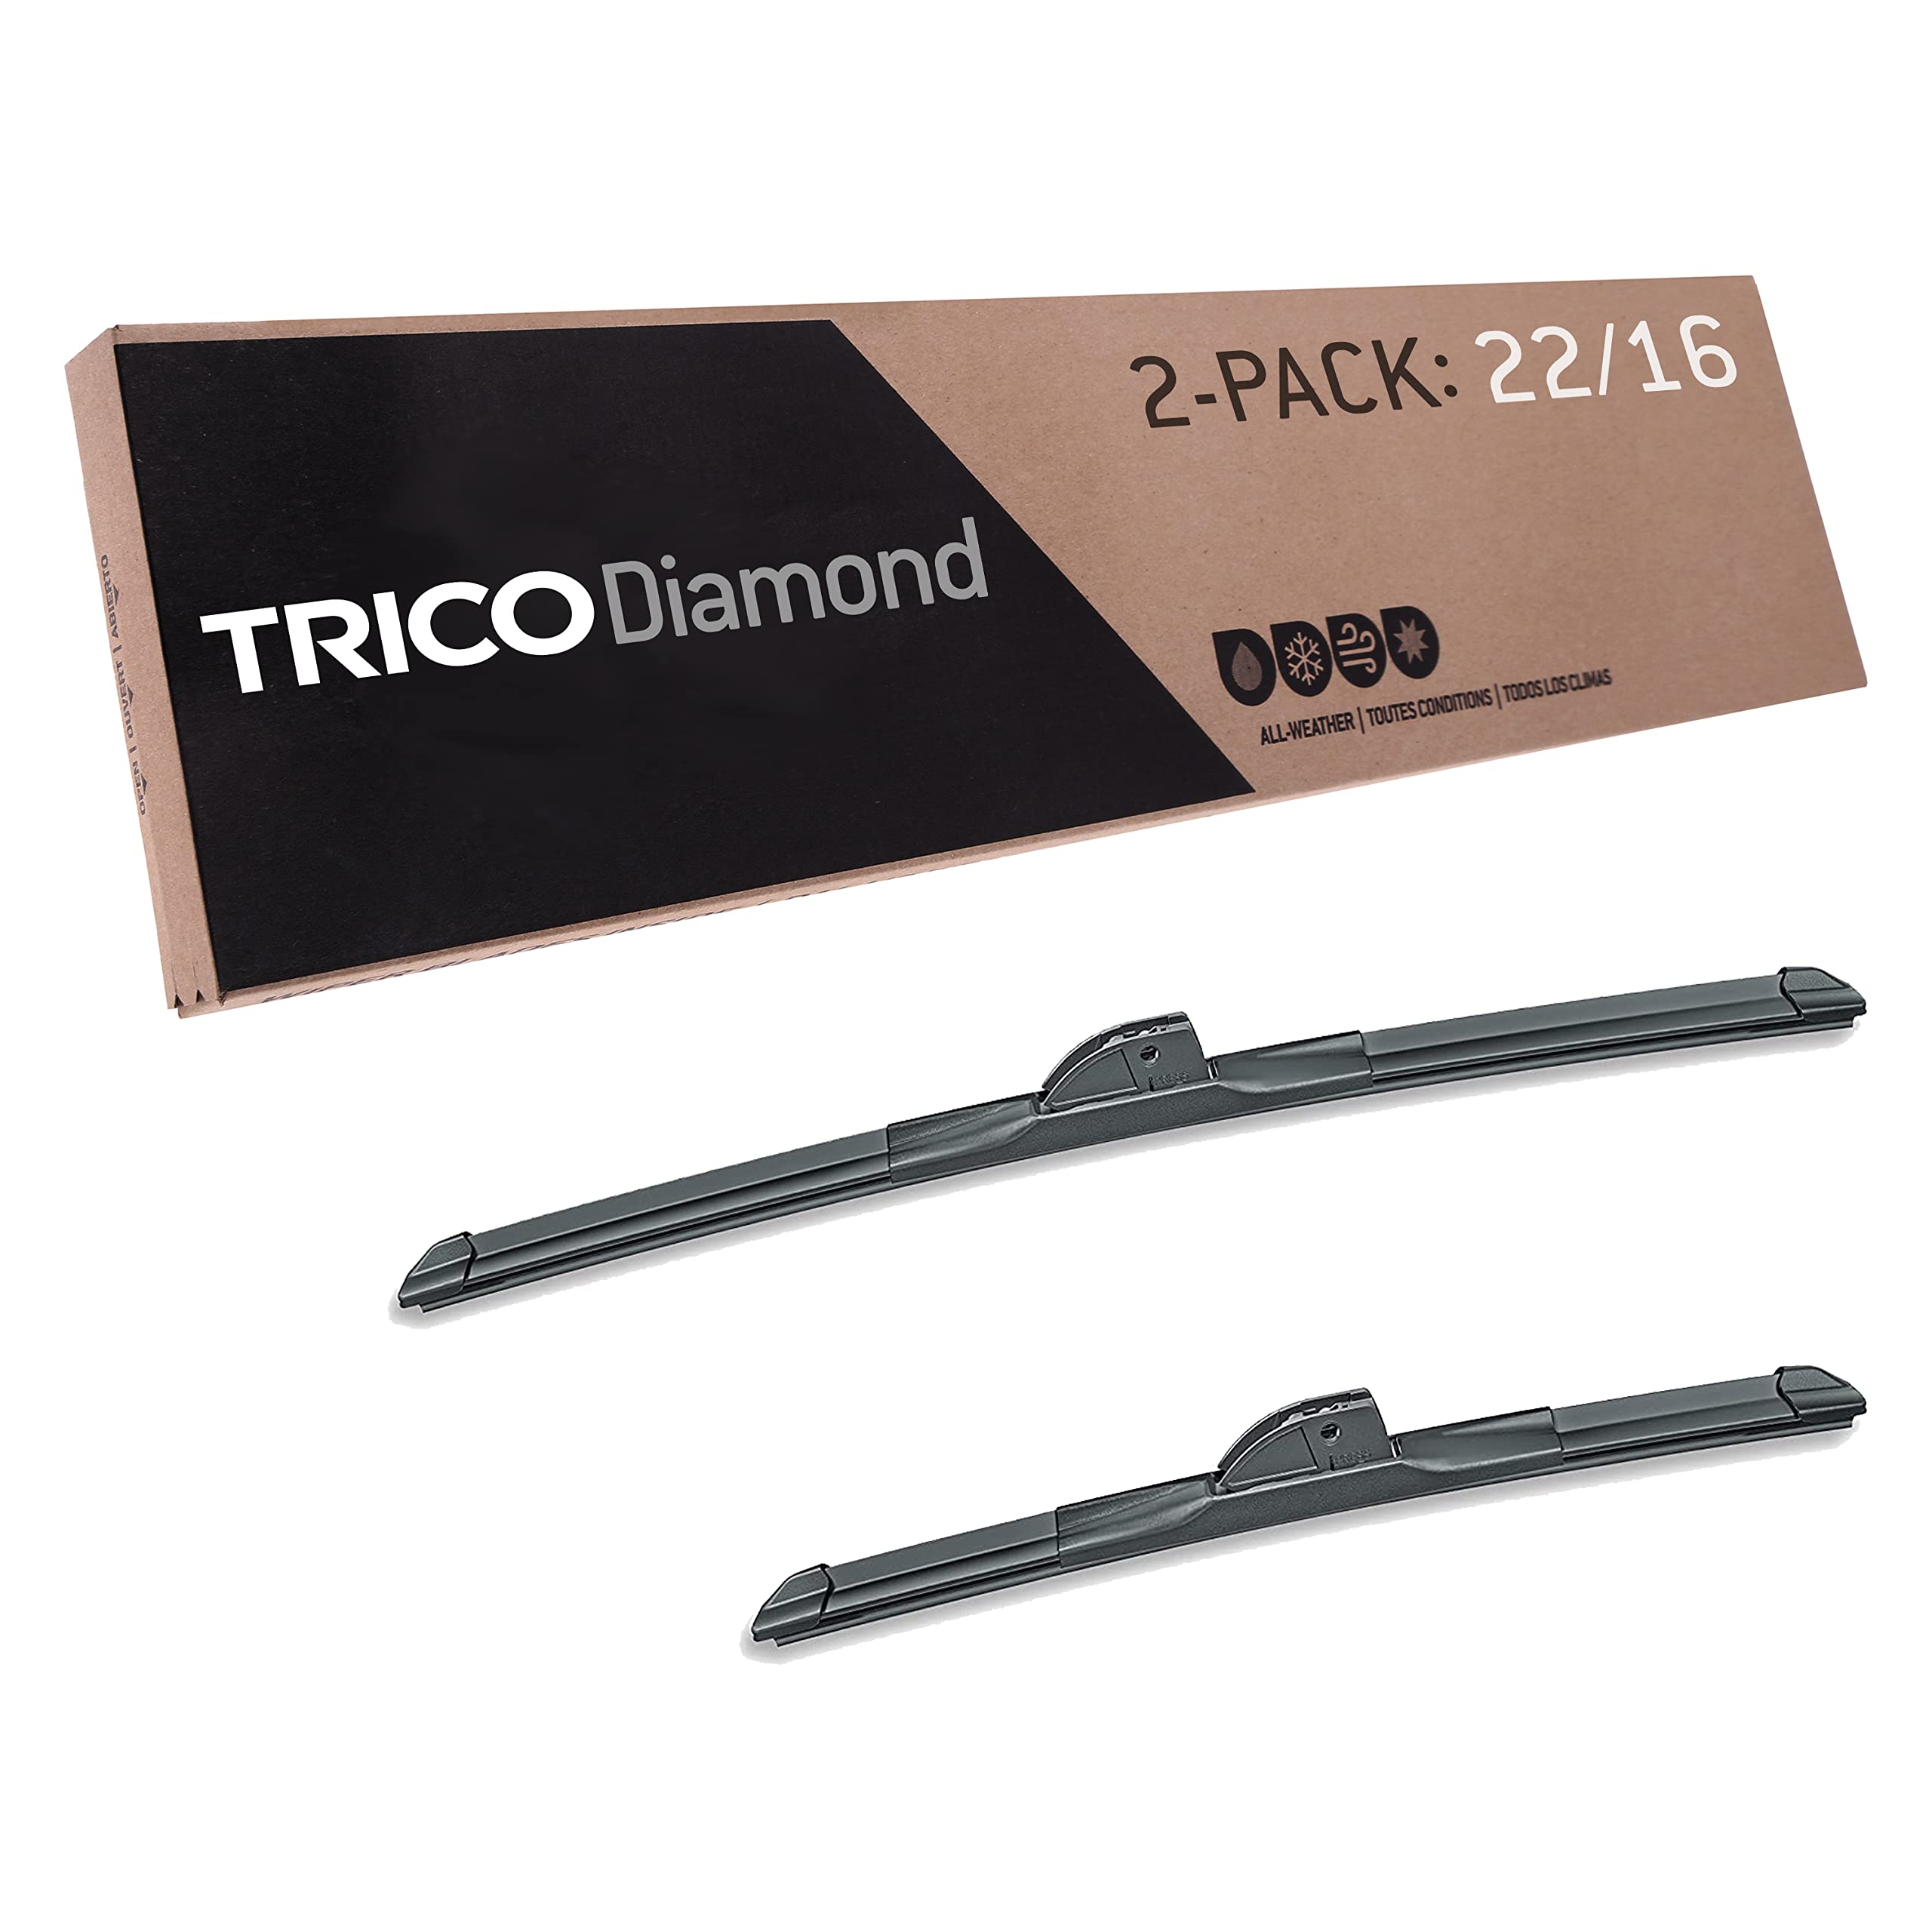 2-Pack TRICO Diamond Windshield Wiper Blades (One of Each: 22" + 16") $10.08 + Free Shipping w/ Prime or on Orders $35+